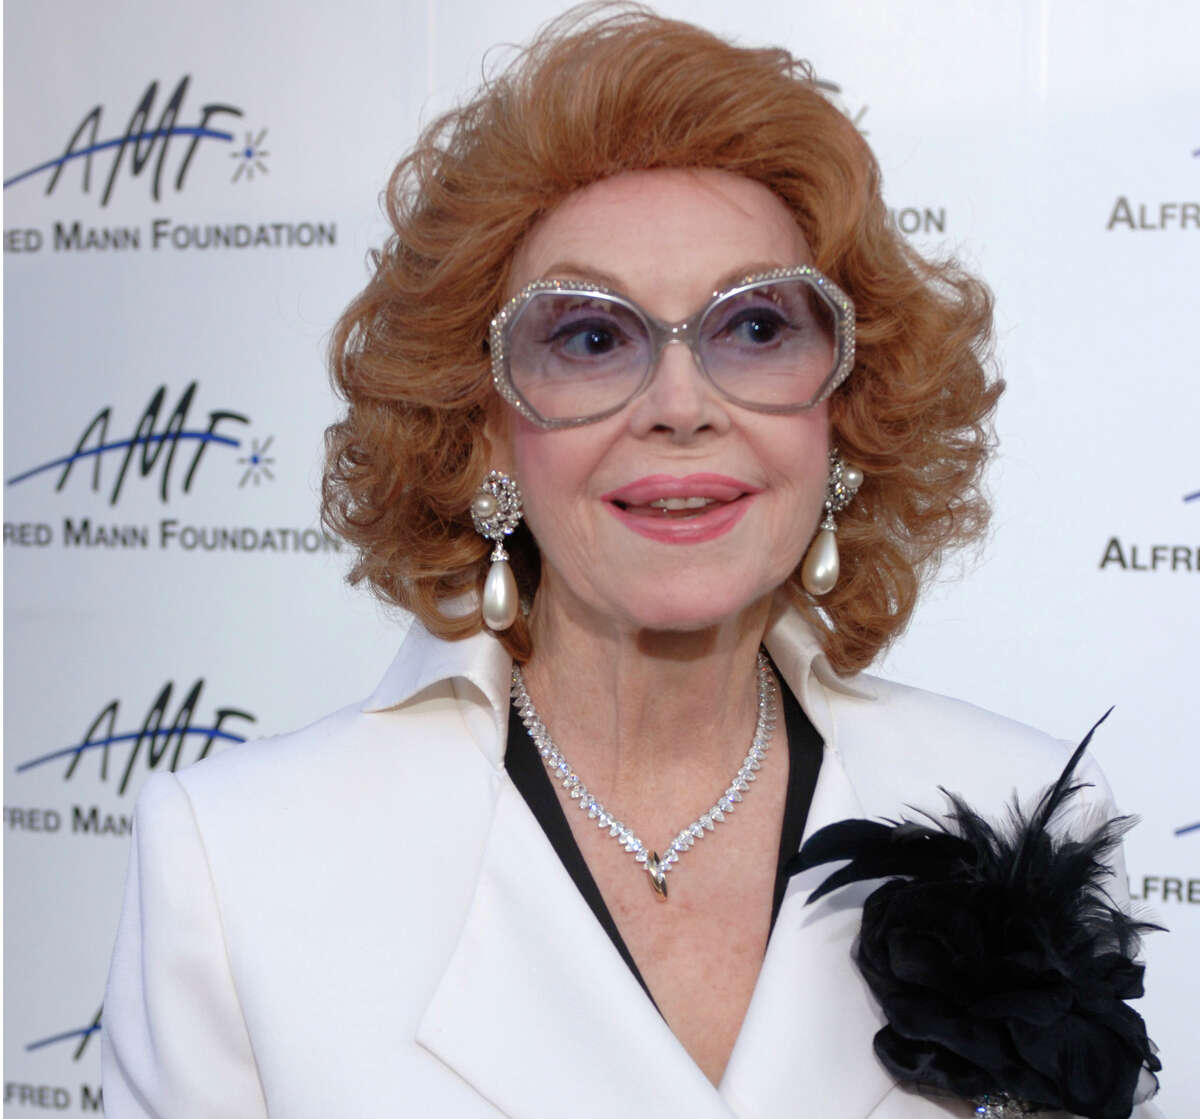 FILE - In this Sept. 9, 2006 file photo, actress Jayne Meadows arrives for the 3rd annual Alfred Mann Foundation Innovation and Inspiration Gala held in Beverly Hills, Calif. The actress and TV personality, Meadows, who often teamed with her husband Steve Allen, has died at age 95. MeadowsÂ?’ son, Bill Allen, said she died Sunday, April 26, 2015, in her home in the Encino area of Los Angeles. (AP Photo/Phil McCarten, File)